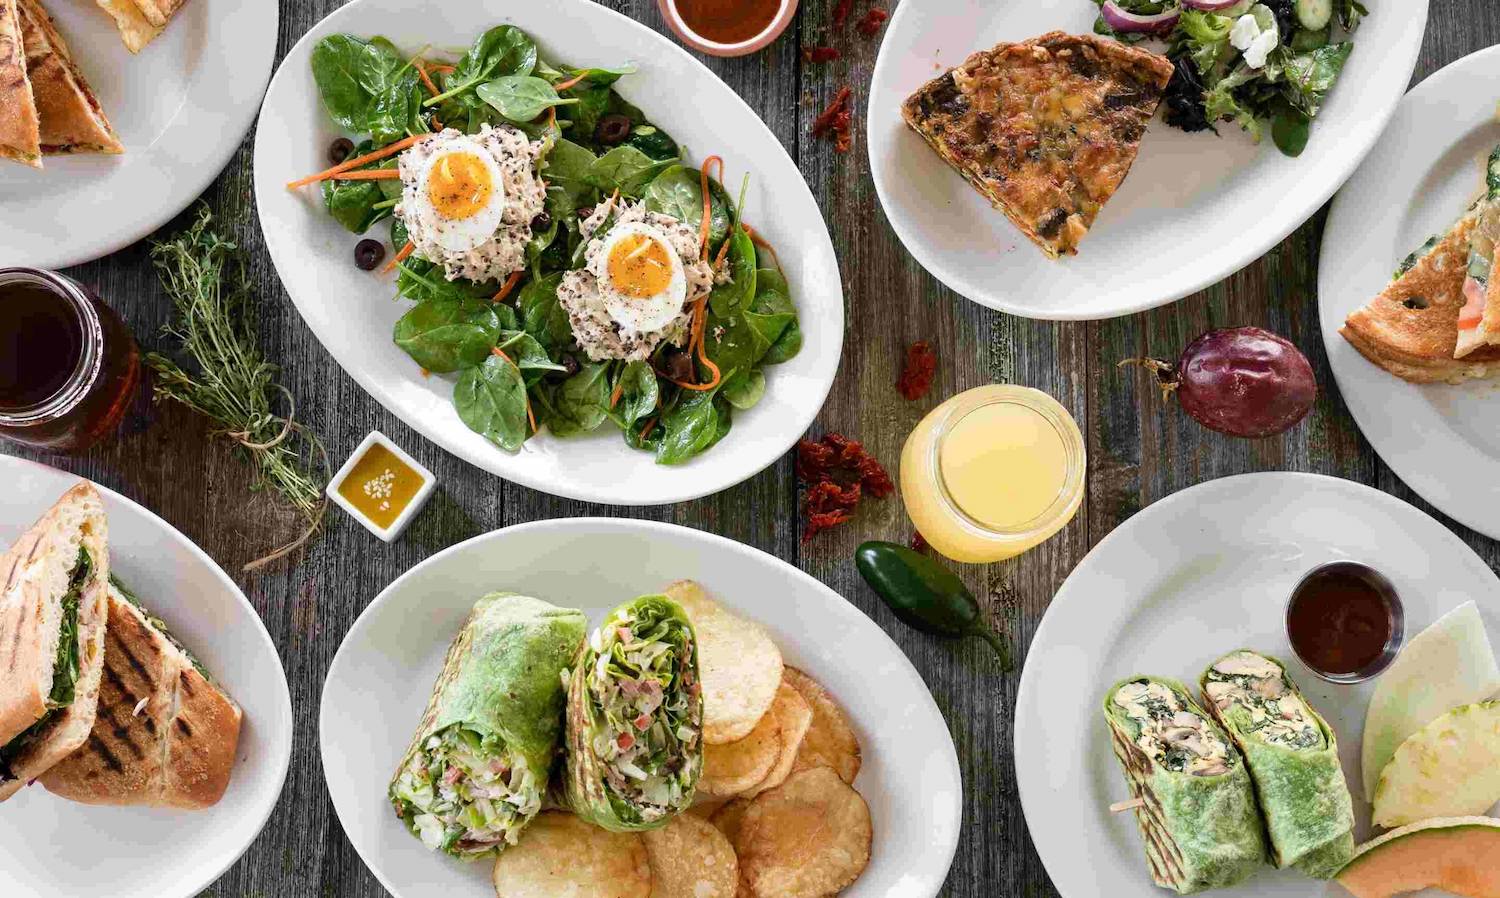 Food dishes from San Diego restaurant Nutmeg Bakery & Cafe in Poway